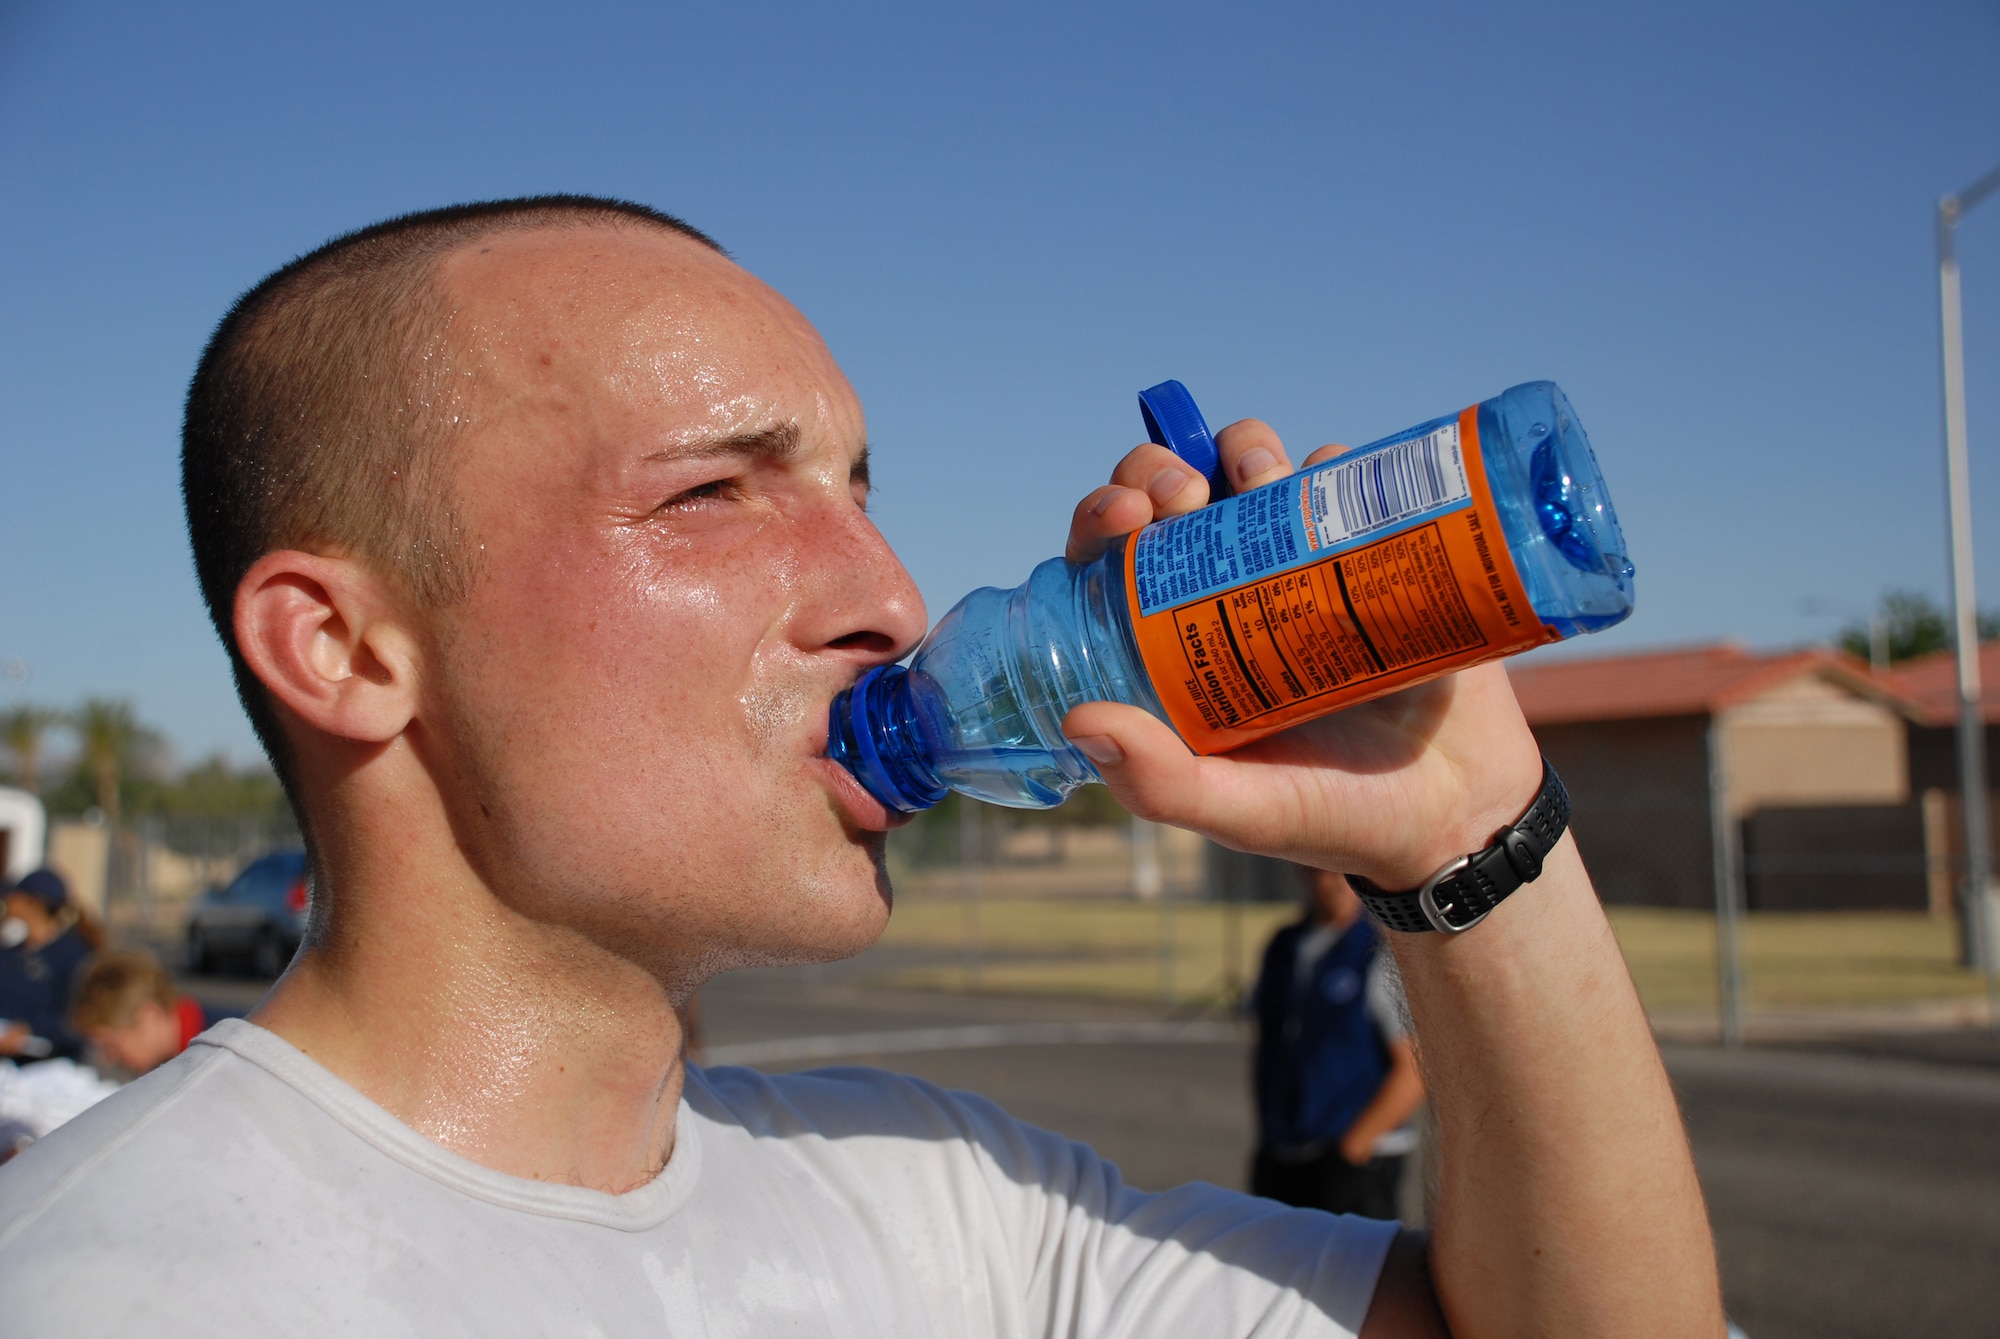 Airman 1st Class Michael Piazza, an air traffic controller with the 56th Operations Support Squadron, hydrates after completing the 13.2 mile marathon held at the Base Fitness Center, May 3. The half marathon consisted of more than 50 Airmen, retirees, and children from Luke Air Force Base. (U.S. Air Force photo/Airman 1st Class Tracie Forte)